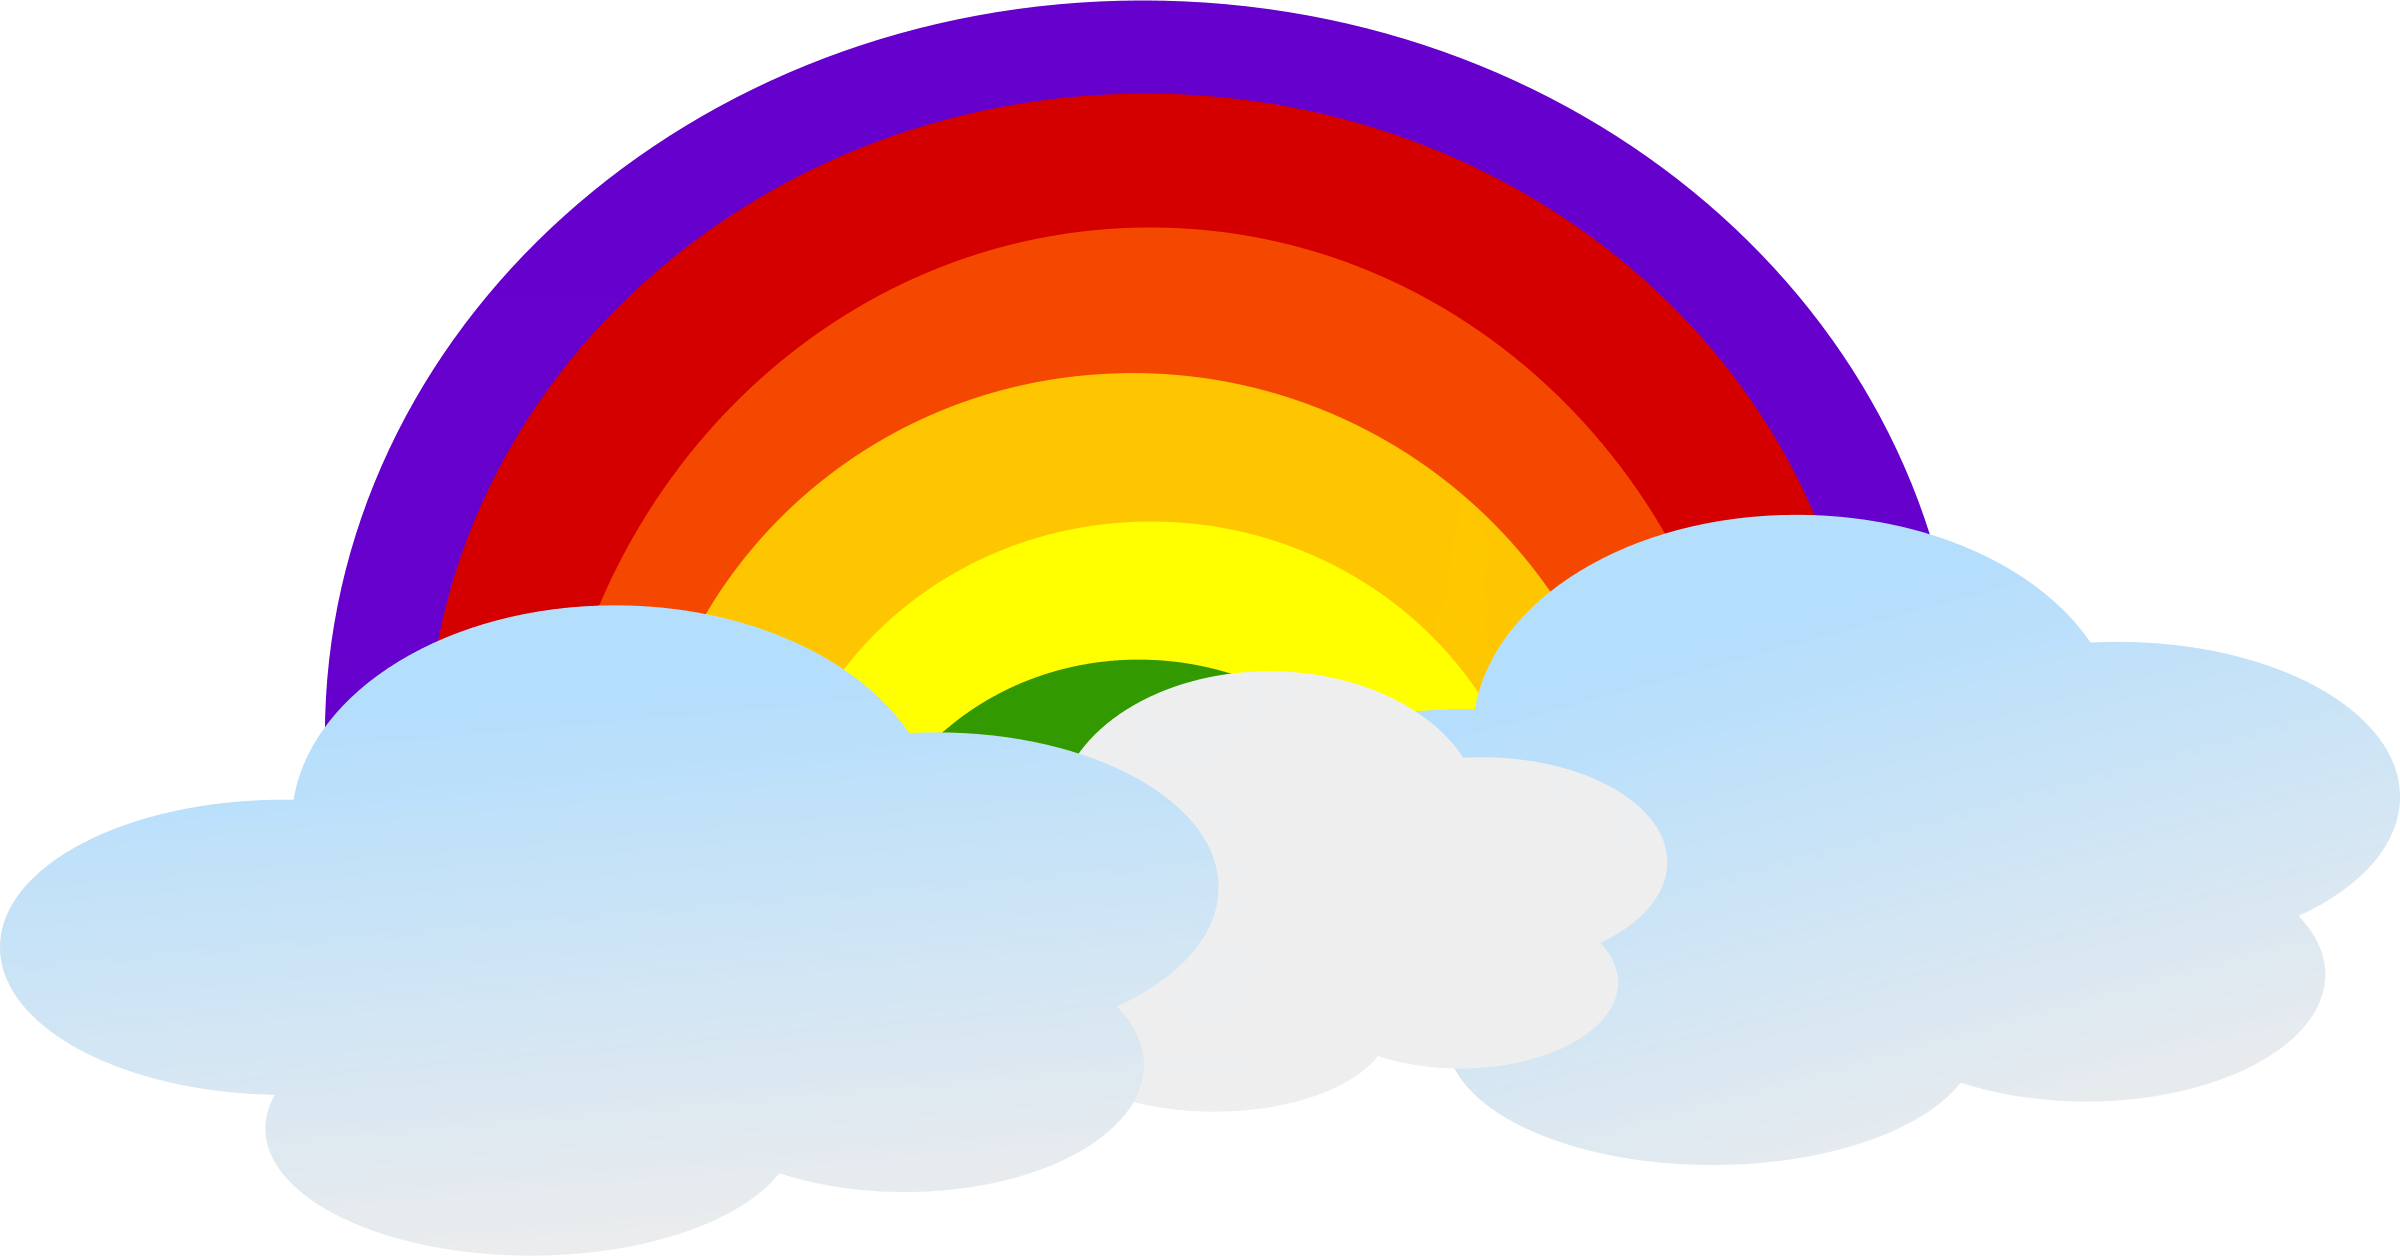 Rainbow And Cloud Clipart - Clouds With Rainbow Clipart.